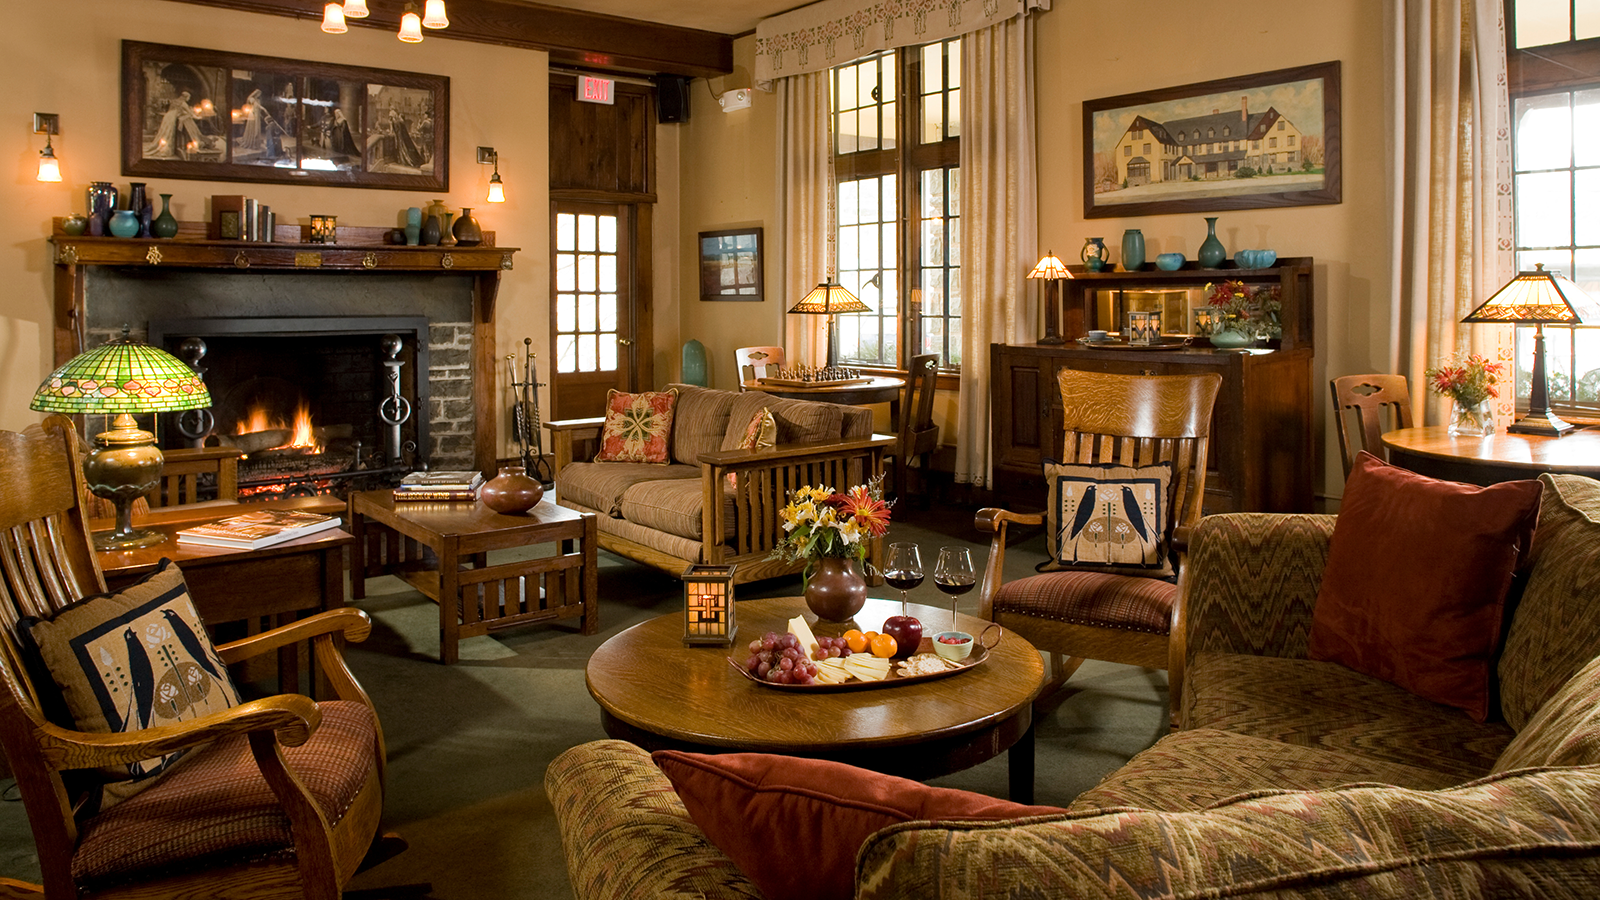 Discover the historic archtiecture of The Settlers Inn at Bingham Park.